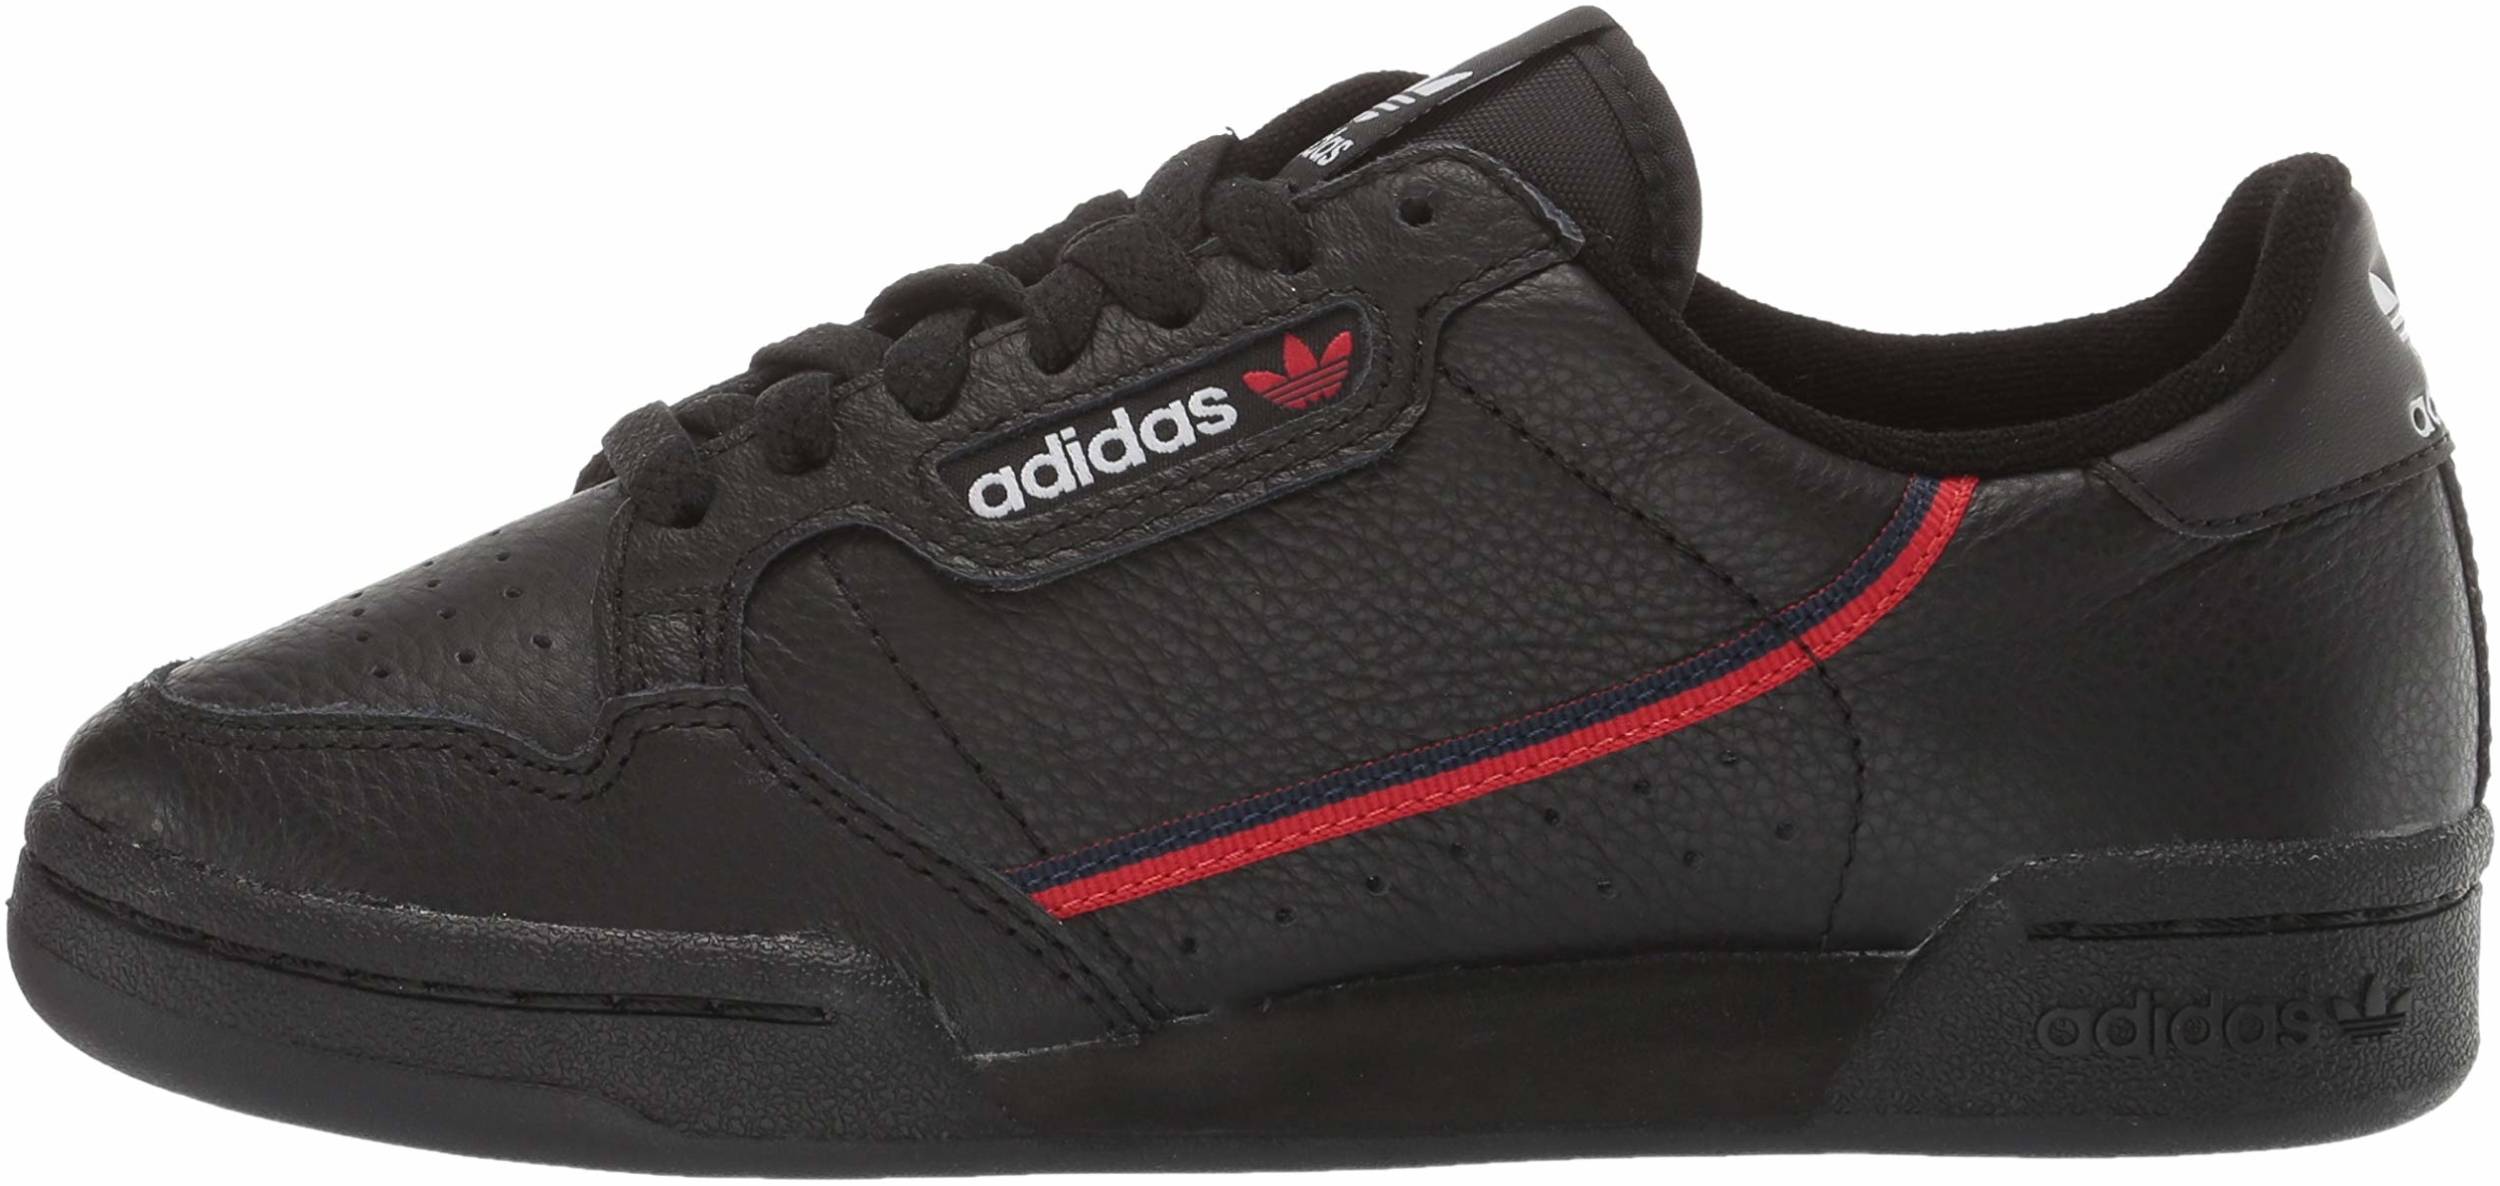 adidas with continental sole